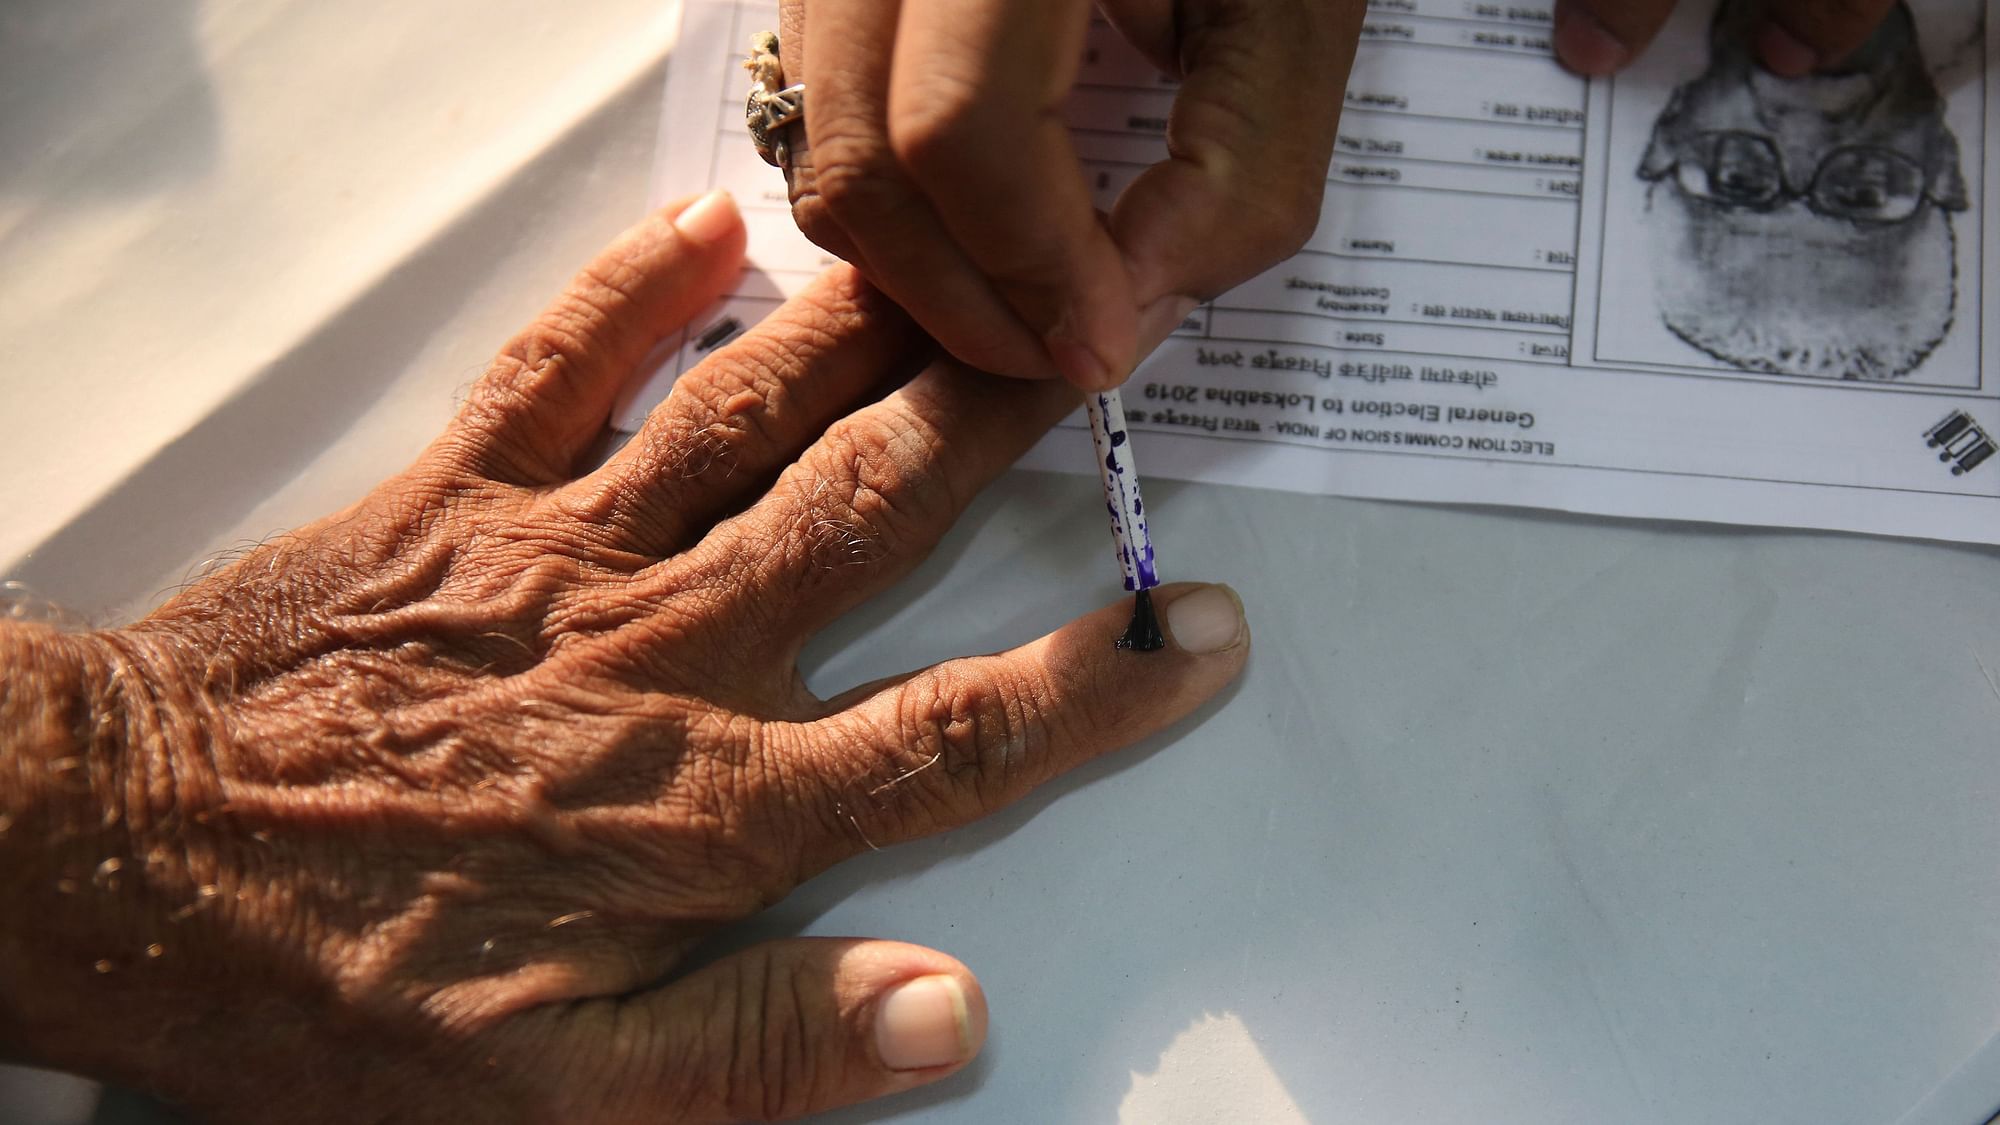 File photo of an  elderly citizen getting ink mark on his finger prior to voting. Used for representation.